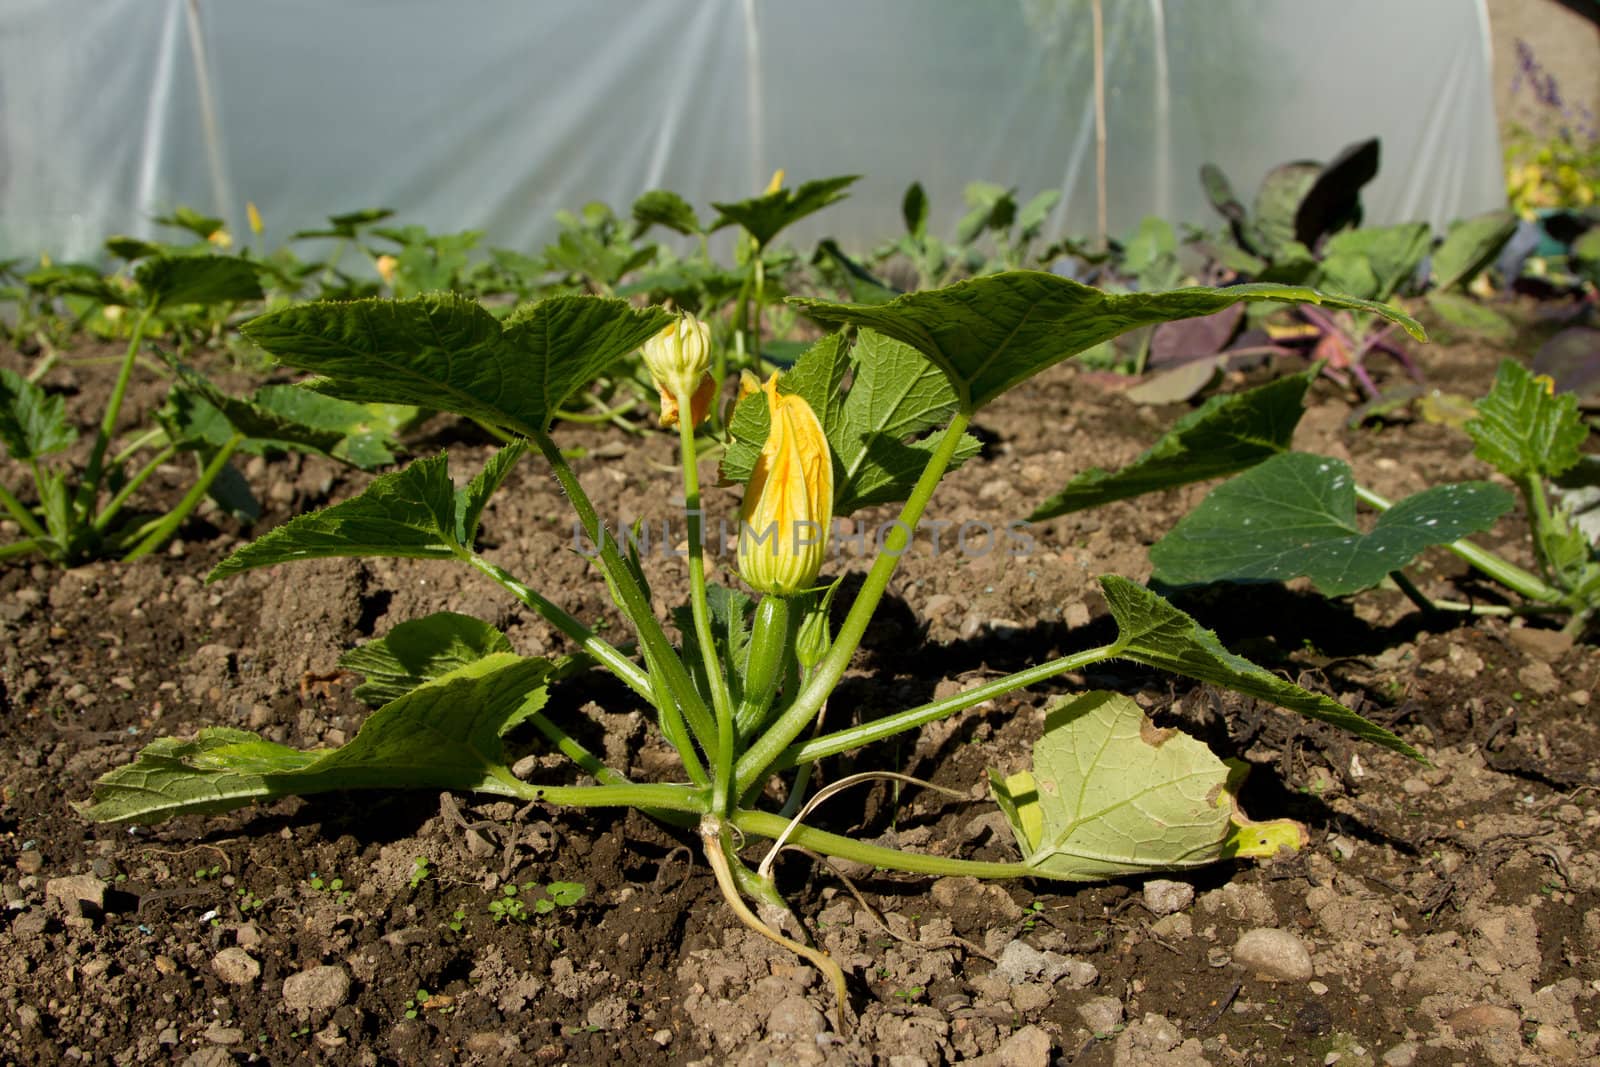 Flowering courgette plant. by richsouthwales